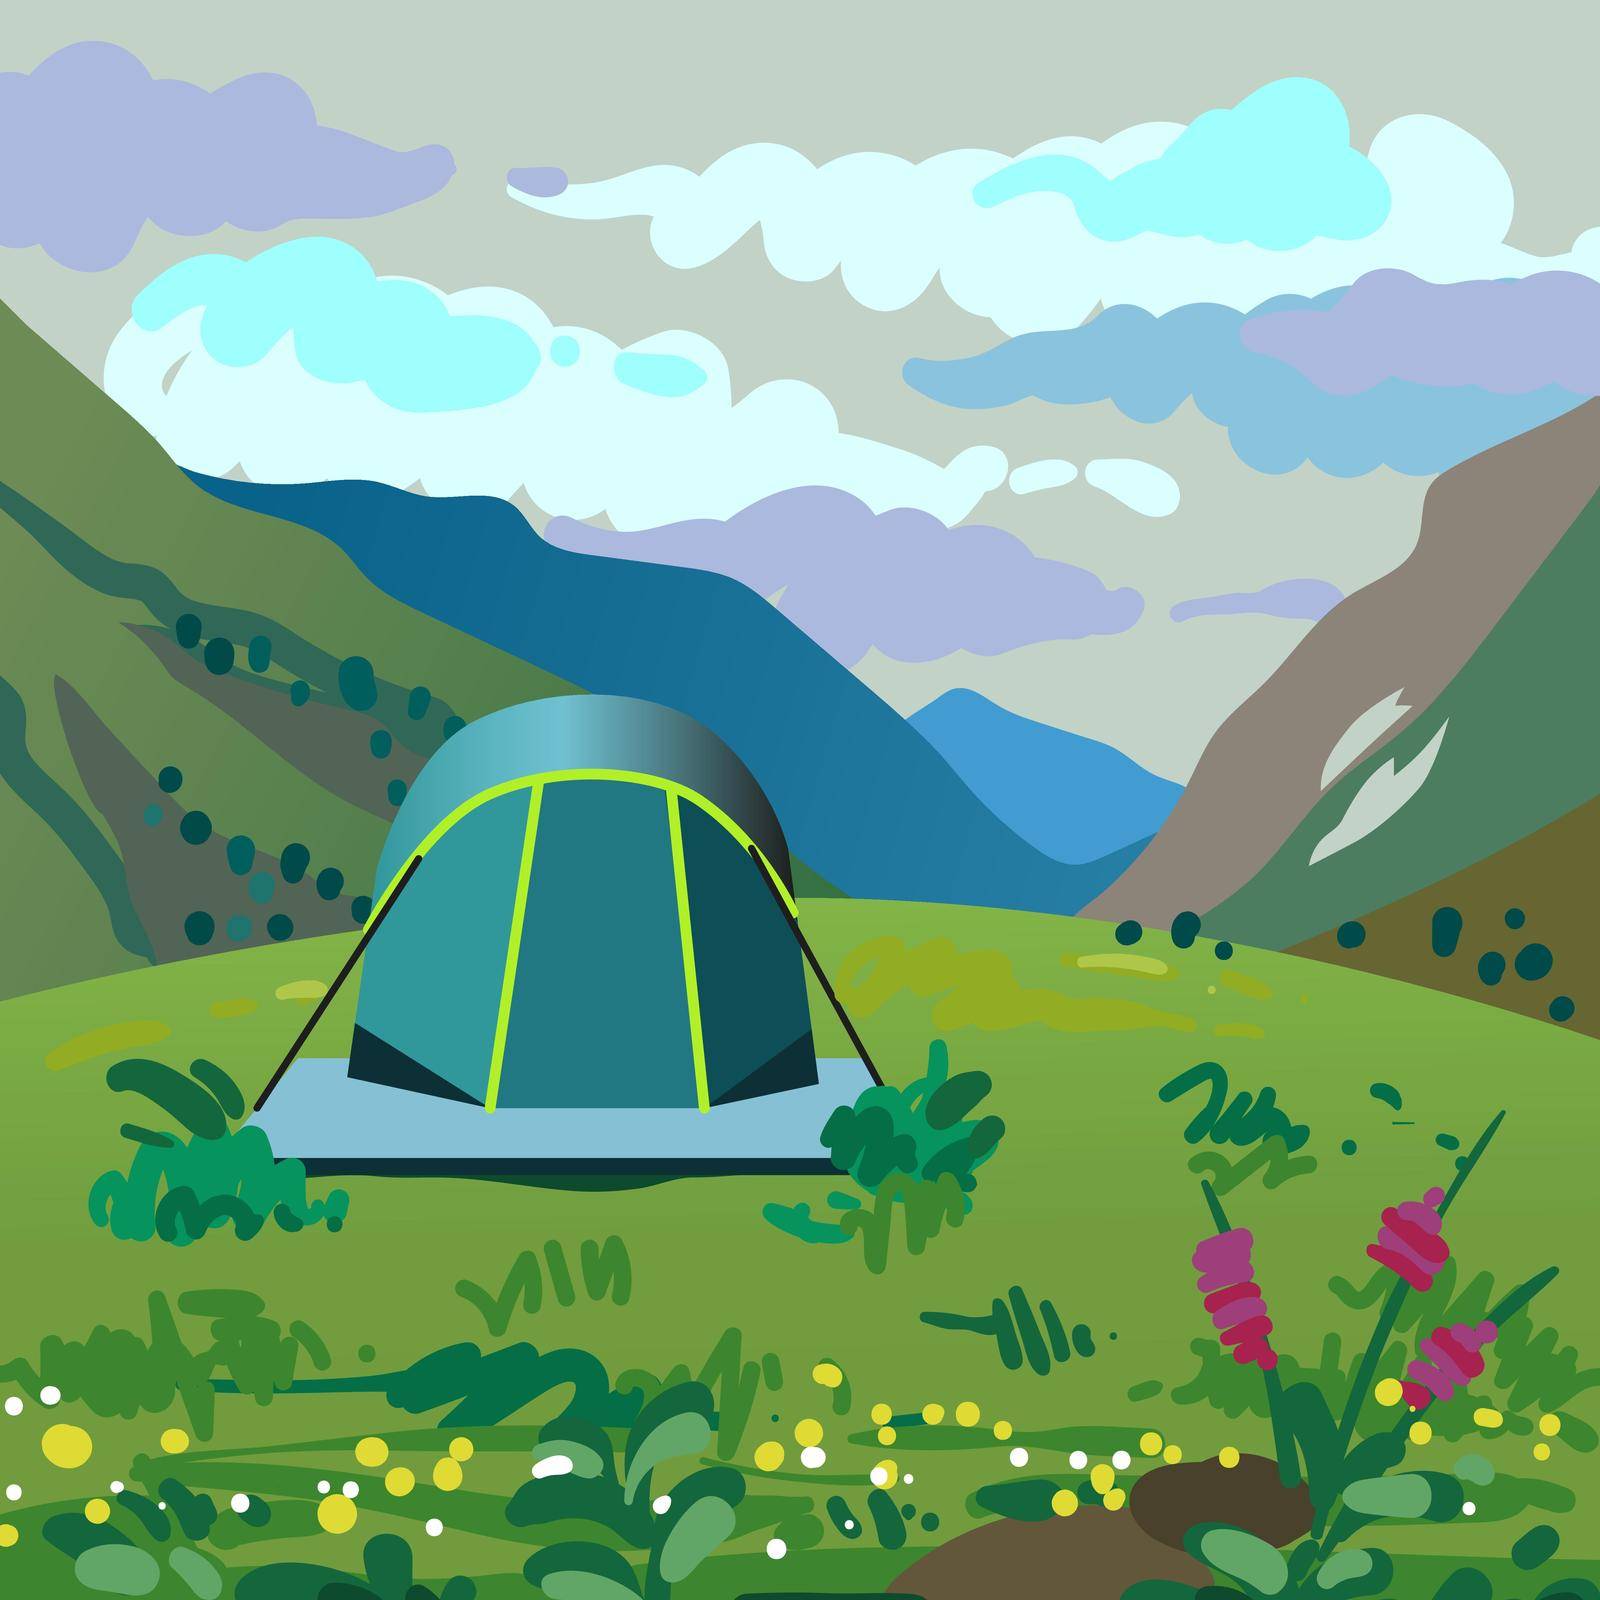 Tent in the mountains. Beautiful vector illustration with mountain landscape.